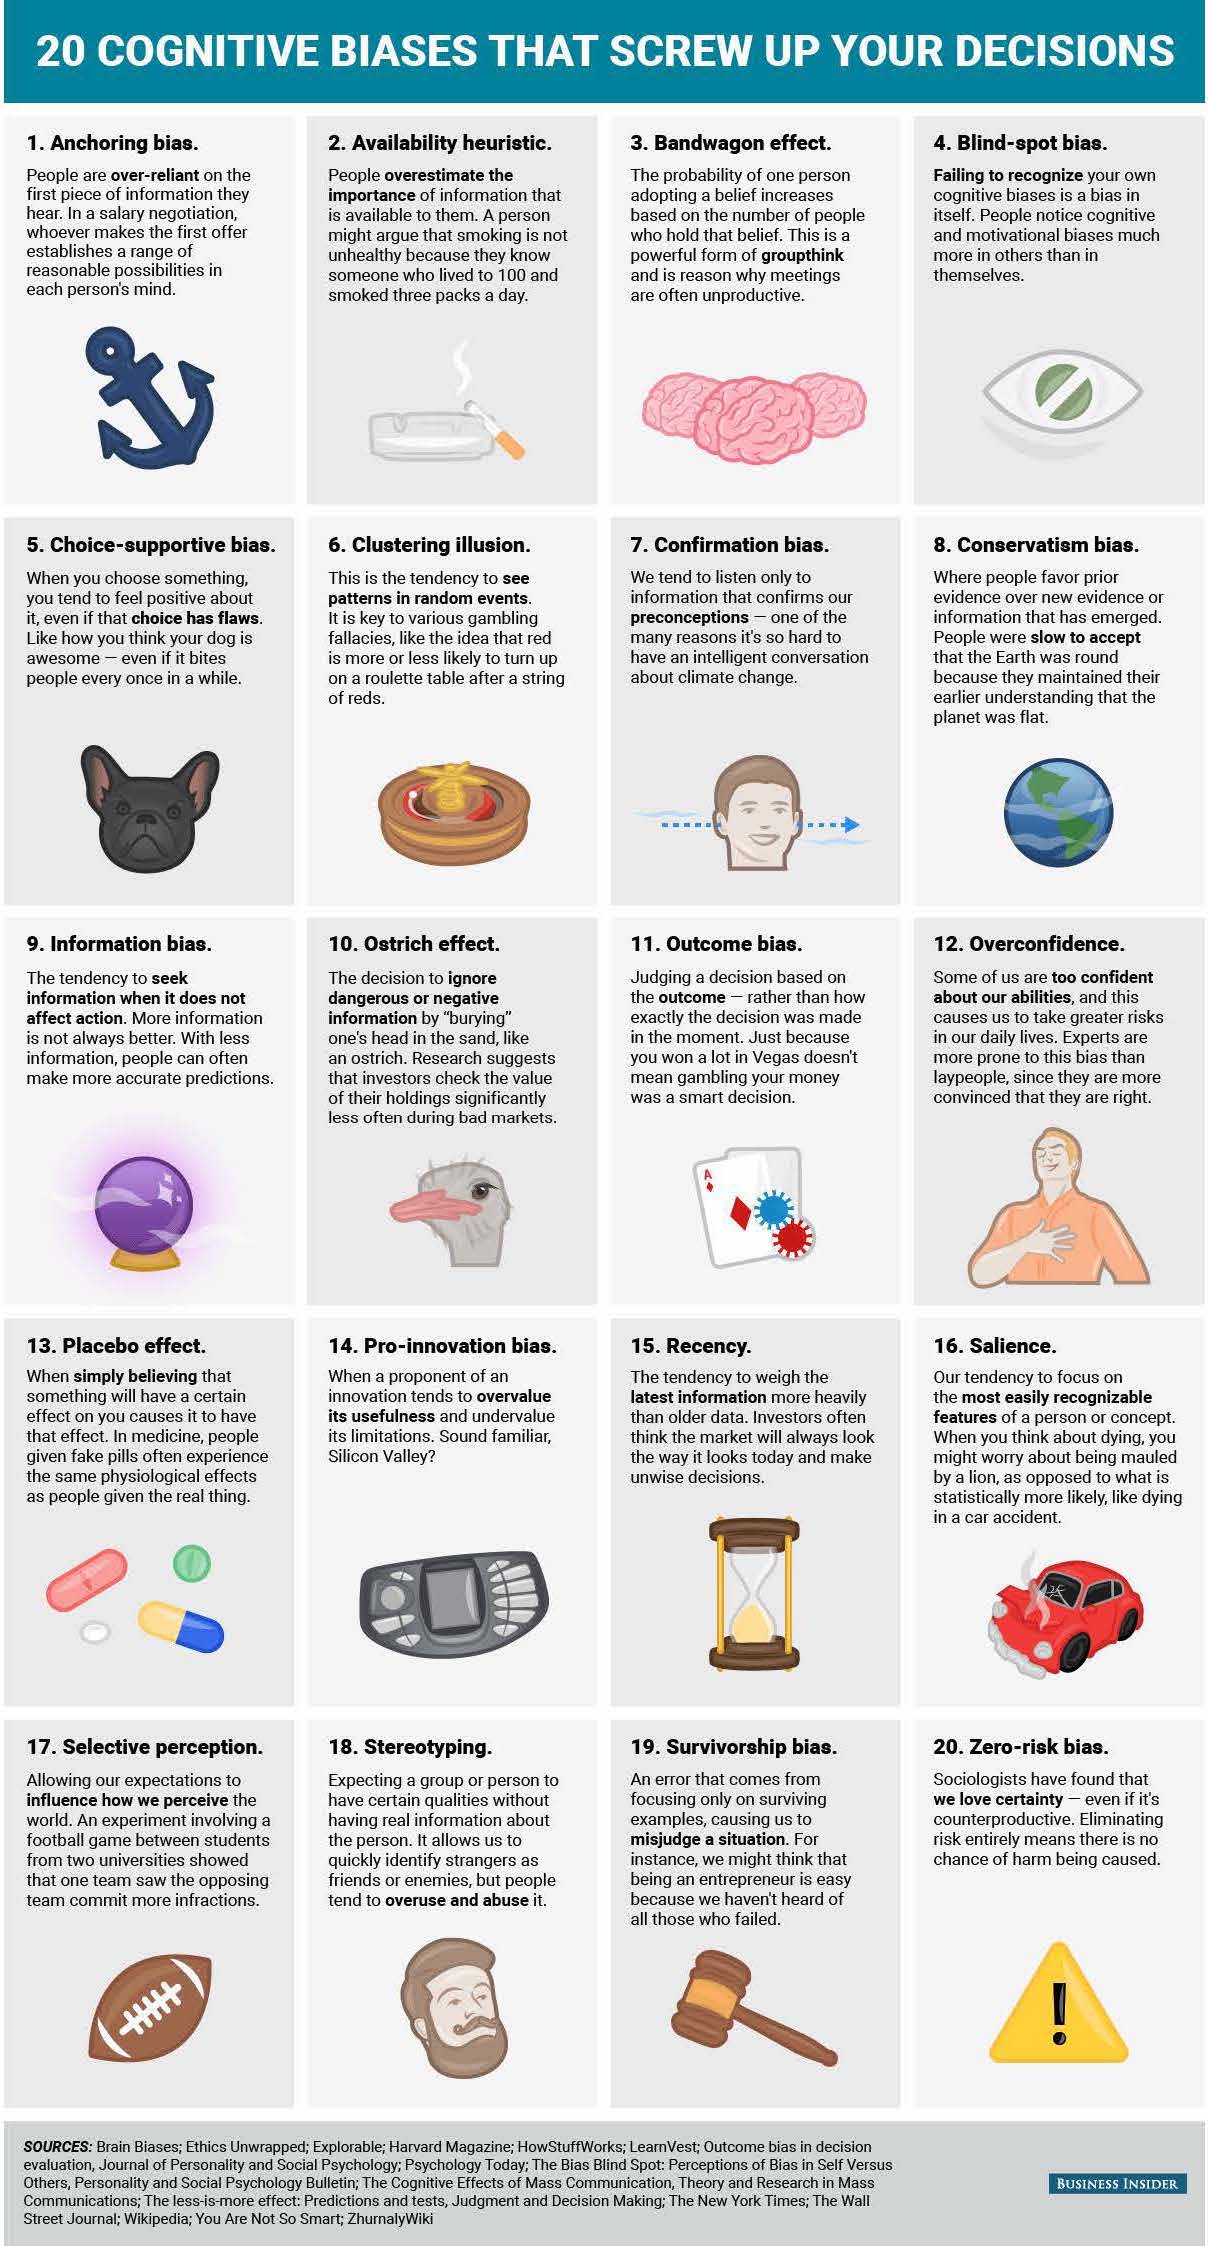 20 COGNITIVE BIASES THAT SCREW UP YOUR DECISIONS 1. Anchoring bias. People are over-reliant on the first piece of information they hear. In a salary negotiation, whoever makes the first offer establishes a range of reasonable possibilities in each person's mind. 2. Availability heuristic. People overestimate the importance of information that is available to them. A person might argue that smoking is not unhealthy because they know someone who lived to 100 and smoked three packs a day. 3. Bandwagon effect. The probability of one person adopting a belief increases based on the number of people who hold that belief. This is a powerful form of groupthink and is reason why meetings are often unproductive. 4. Blind-spot bias. Failing to recognize your own cognitive biases is a bias in itself. People notice cognitive and motivational biases much more in others than in themselves. 5. Choice-supportive bias. When you choose something, you tend to feel positive about it, even if that choice has flaws. Like how you think your dog is awesome — even if it bites people every once in a while. 6. Clustering illusion. This is the tendency to see patterns in random events. It is key to various gambling fallacies, like the idea that red is more or less likely to turn up on a roulette table after a string of reds. 7. Confirmation bias. We tend to listen only to information that confirms our preconceptions — one of the many reasons it's so hard to have an intelligent conversation about climate change. 8. Conservatism bias. Where people favor prior evidence over new evidence or information that has emerged. People were slow to accept that the Earth was round because they maintained their earlier understanding that the planet was flat. 9. Information bias. The tendency to seek information when it does not affect action. More information is not always better. With less information, people can often make more accurate predictions. 10. Ostrich effect. The decision to ignore dangerous or negative information by "burying" one's head in the sand, like an ostrich. Research suggests that investors check the value of their holdings significantly less often during bad markets. 11. Outcome bias. Judging a decision based on the outcome — rather than how exactly the decision was made in the moment. Just because you won a lot in Vegas doesn't mean gambling your money was a smart decision. 12. Overconfidence. Some of us are too confident about our abilities, and this causes us to take greater risks in our daily lives. Experts are more prone to this bias than laypeople, since they are more convinced that they are right. 13. Placebo effect. When simply believing that something will have a certain effect on you causes it to have that effect. In medicine, people given fake pills often experience the same physiological effects as people given the real thing. 14. Pro-innovation bias. When a proponent of an innovation tends to overvalue its usefulness and undervalue its limitations. Sound familiar, Silicon Valley? 15. Recency. The tendency to weigh the latest information more heavily than older data. Investors often think the market will always look the way it looks today and make unwise decisions. 16. Salience. Our tendency to focus on the most easily recognizable features of a person or concept. When you think about dying, you might worry about being mauled by a lion, as opposed to what is statistically more likely, like dying in a car accident. 17. Selective perception. Allowing our expectations to influence how we perceive the world. An experiment involving a football game between students from two universities showed that one team saw the opposing team commit more infractions. 18. Stereotyping. Expecting a group or person to have certain qualities without having real information about the person. It allows us to quickly identify strangers as friends or enemies, but people tend to overuse and abuse it. 19. Survivorship bias. An error that comes from focusing only on surviving examples, causing us to misjudge a situation. For instance, we might think that being an entrepreneur is easy because we haven't heard of all those who failed. 20. Zero-risk bias. Sociologists have found that we love certainty — even if it's counterproductive. Eliminating risk entirely means there is no chance of harm being caused. SOURCES: Brain Biases; Ethics Unwrapped; Explorable; Harvard Magazine; HowStuffWorks; LearnVest; Outcome bias in decision evaluation, Journal of Personality and Social Psychology; Psychology Today; The Bias Blind Spot: Perceptions of Bias in Self Versus Others, Personality and Social Psychology Bulletin; The Cognitive Effects of Mass Communication, Theory and Research in Mass Communications; The less-is-more effect: Predictions and tests, Judgment and Decision Making; The New York Times; The Wall Street Journal; Wikipedia; You Are Not So Smart; ZhurnalyWiki